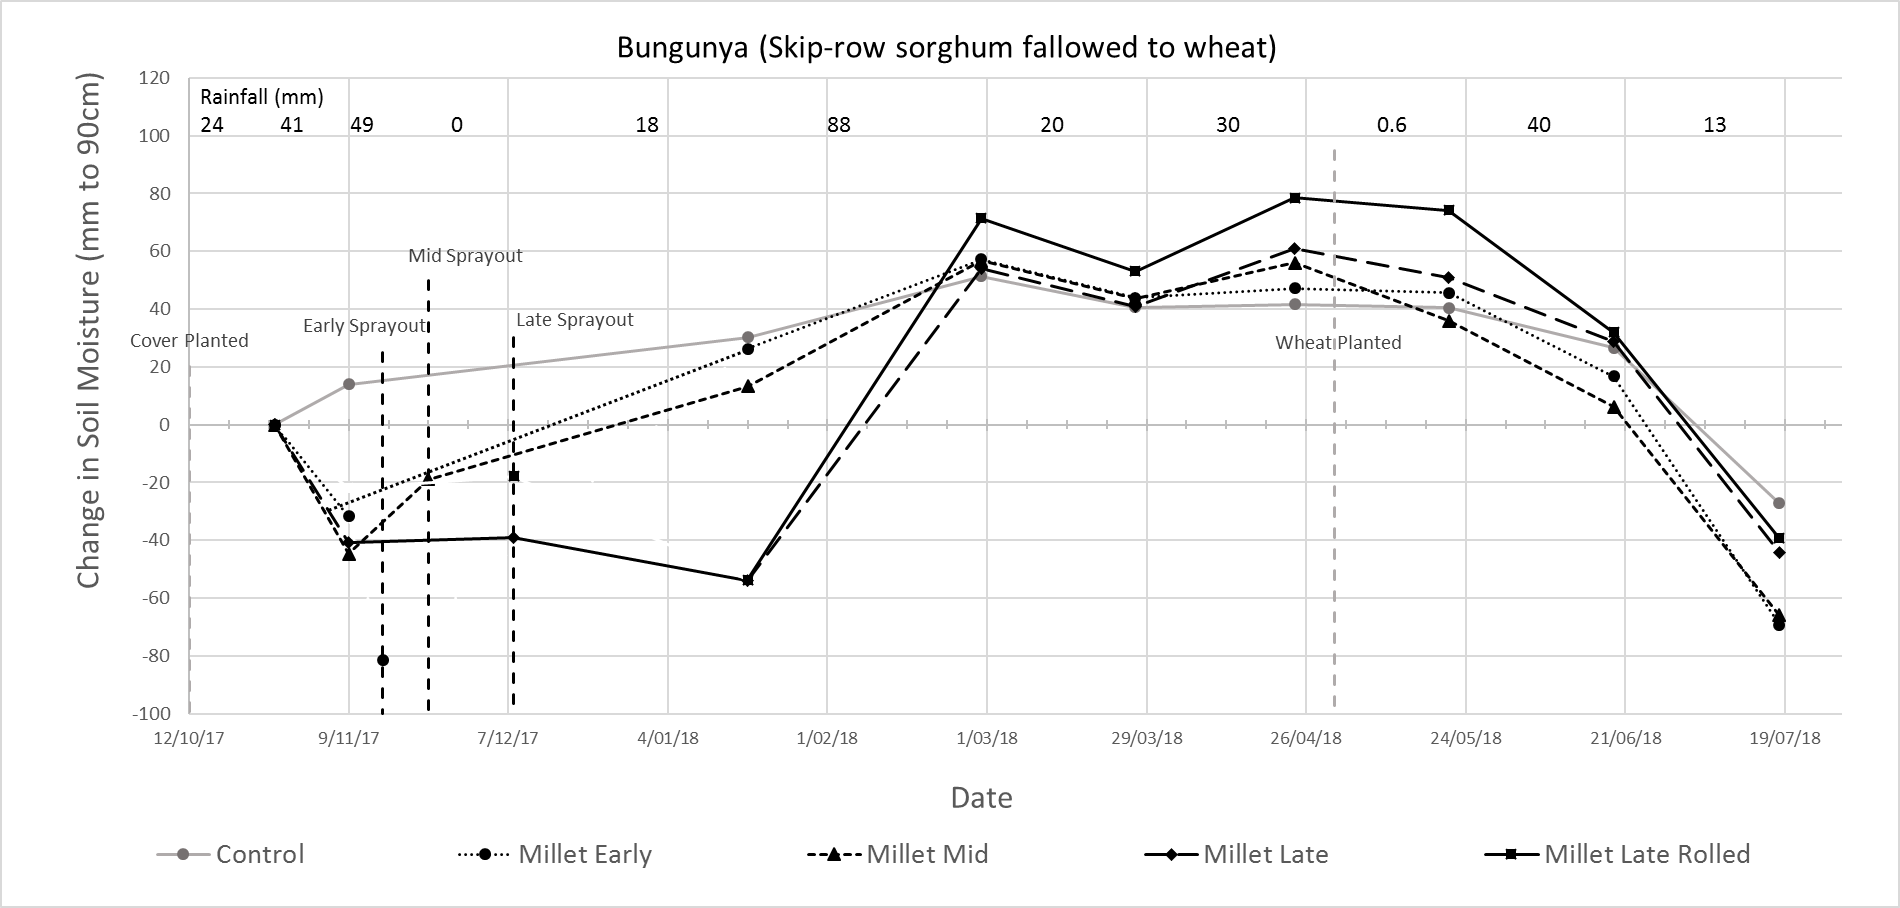 This is a line graph showing the changes in soil water (mm to 90 cm) from planting of the millet cover crop treatments sprayed out at different crop growth stages until harvest of the later wheat crop at Bungunya.